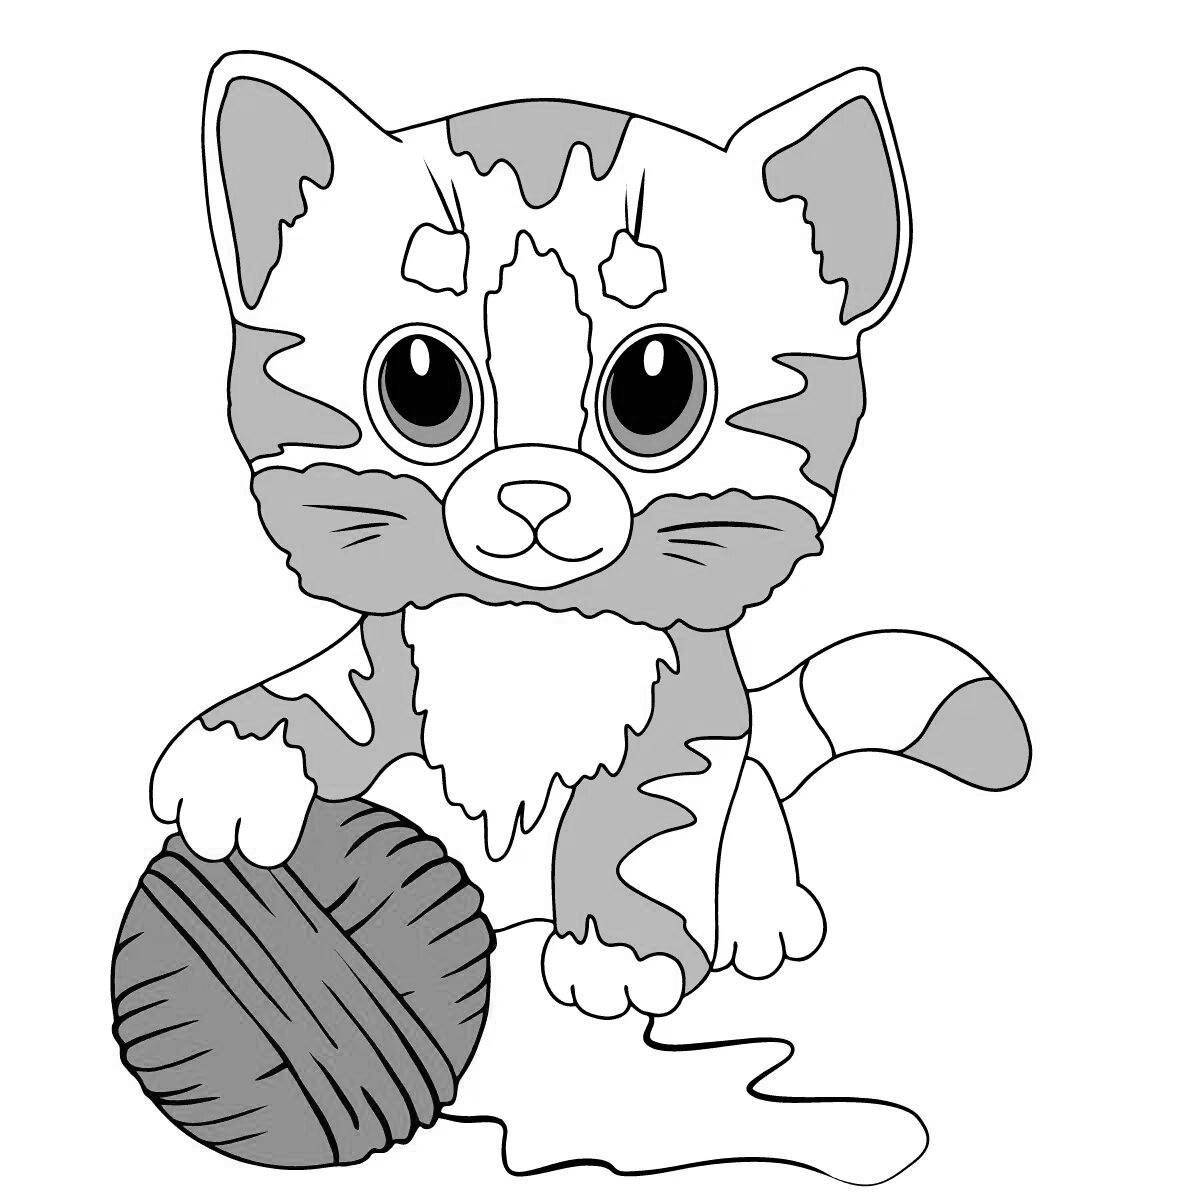 Furry coloring page cat baby от ануки